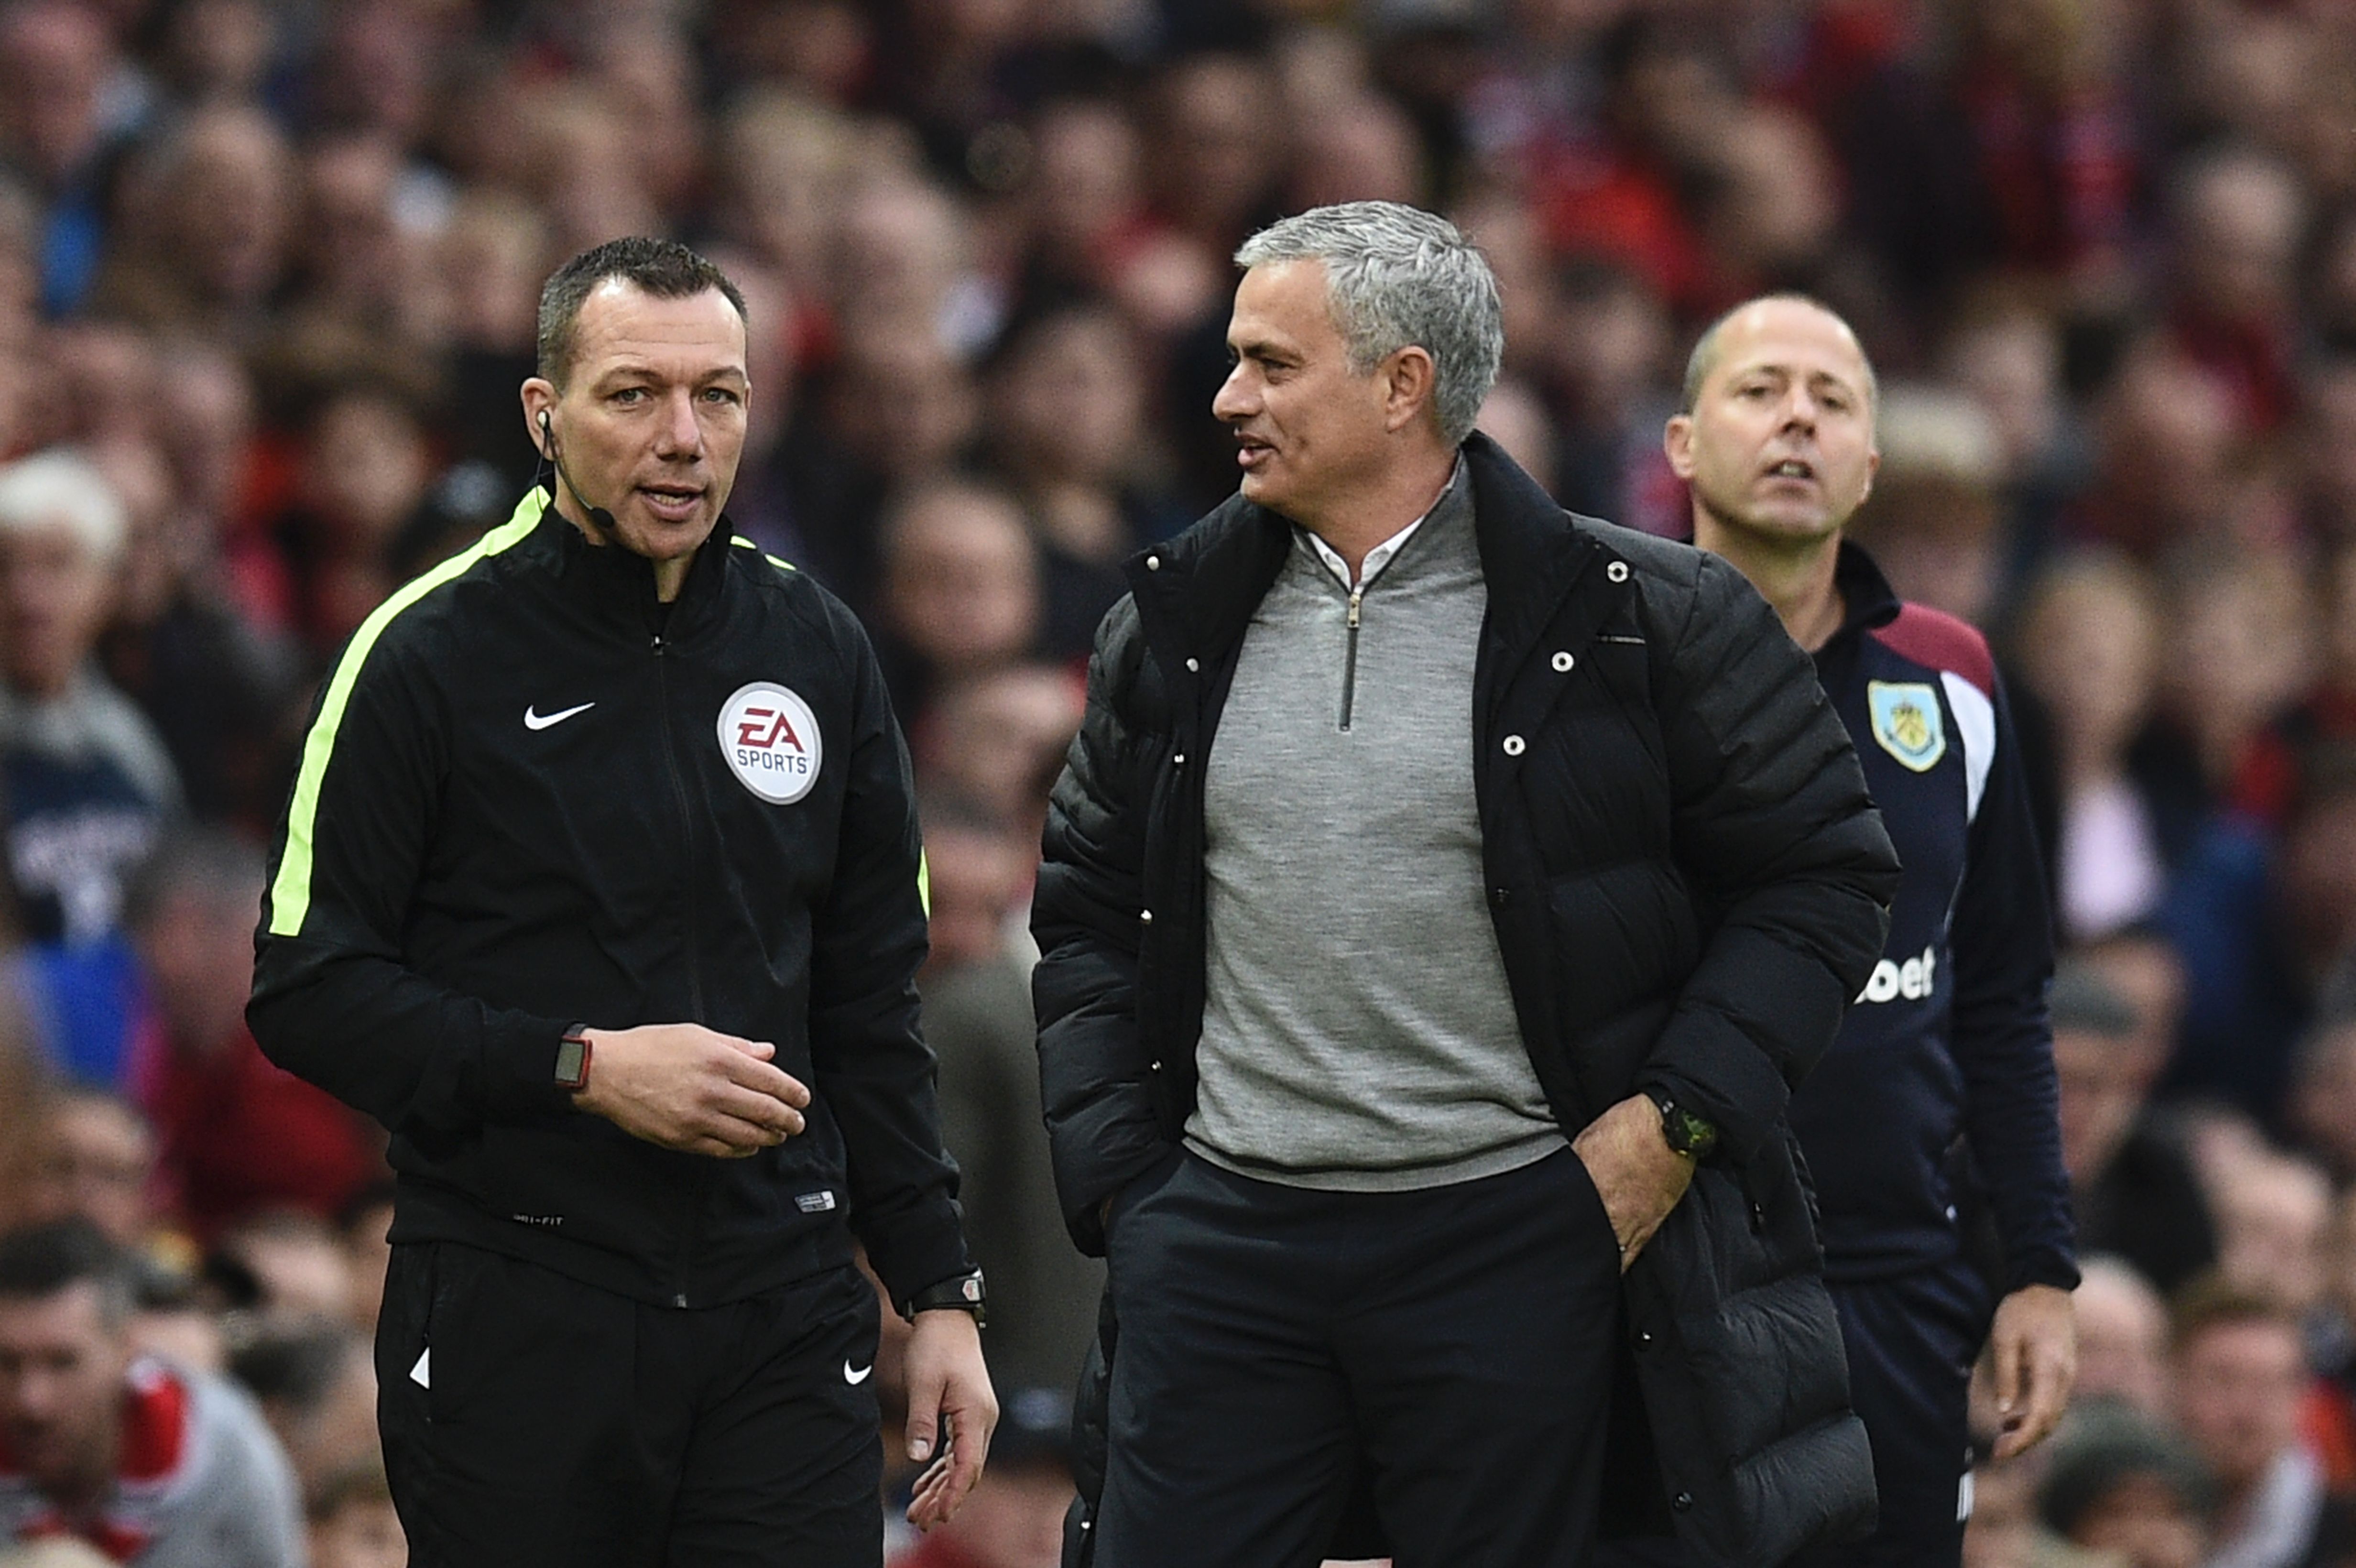 Manchester United's Portuguese manager Jose Mourinho (R) talks with fourth official Kevin Friend (L) on the touchline during the English Premier League football match between Manchester United and Burnley at Old Trafford in Manchester, north west England, on October 29, 2016.    (Photo by Oli Scarff/AFP/Getty Images)